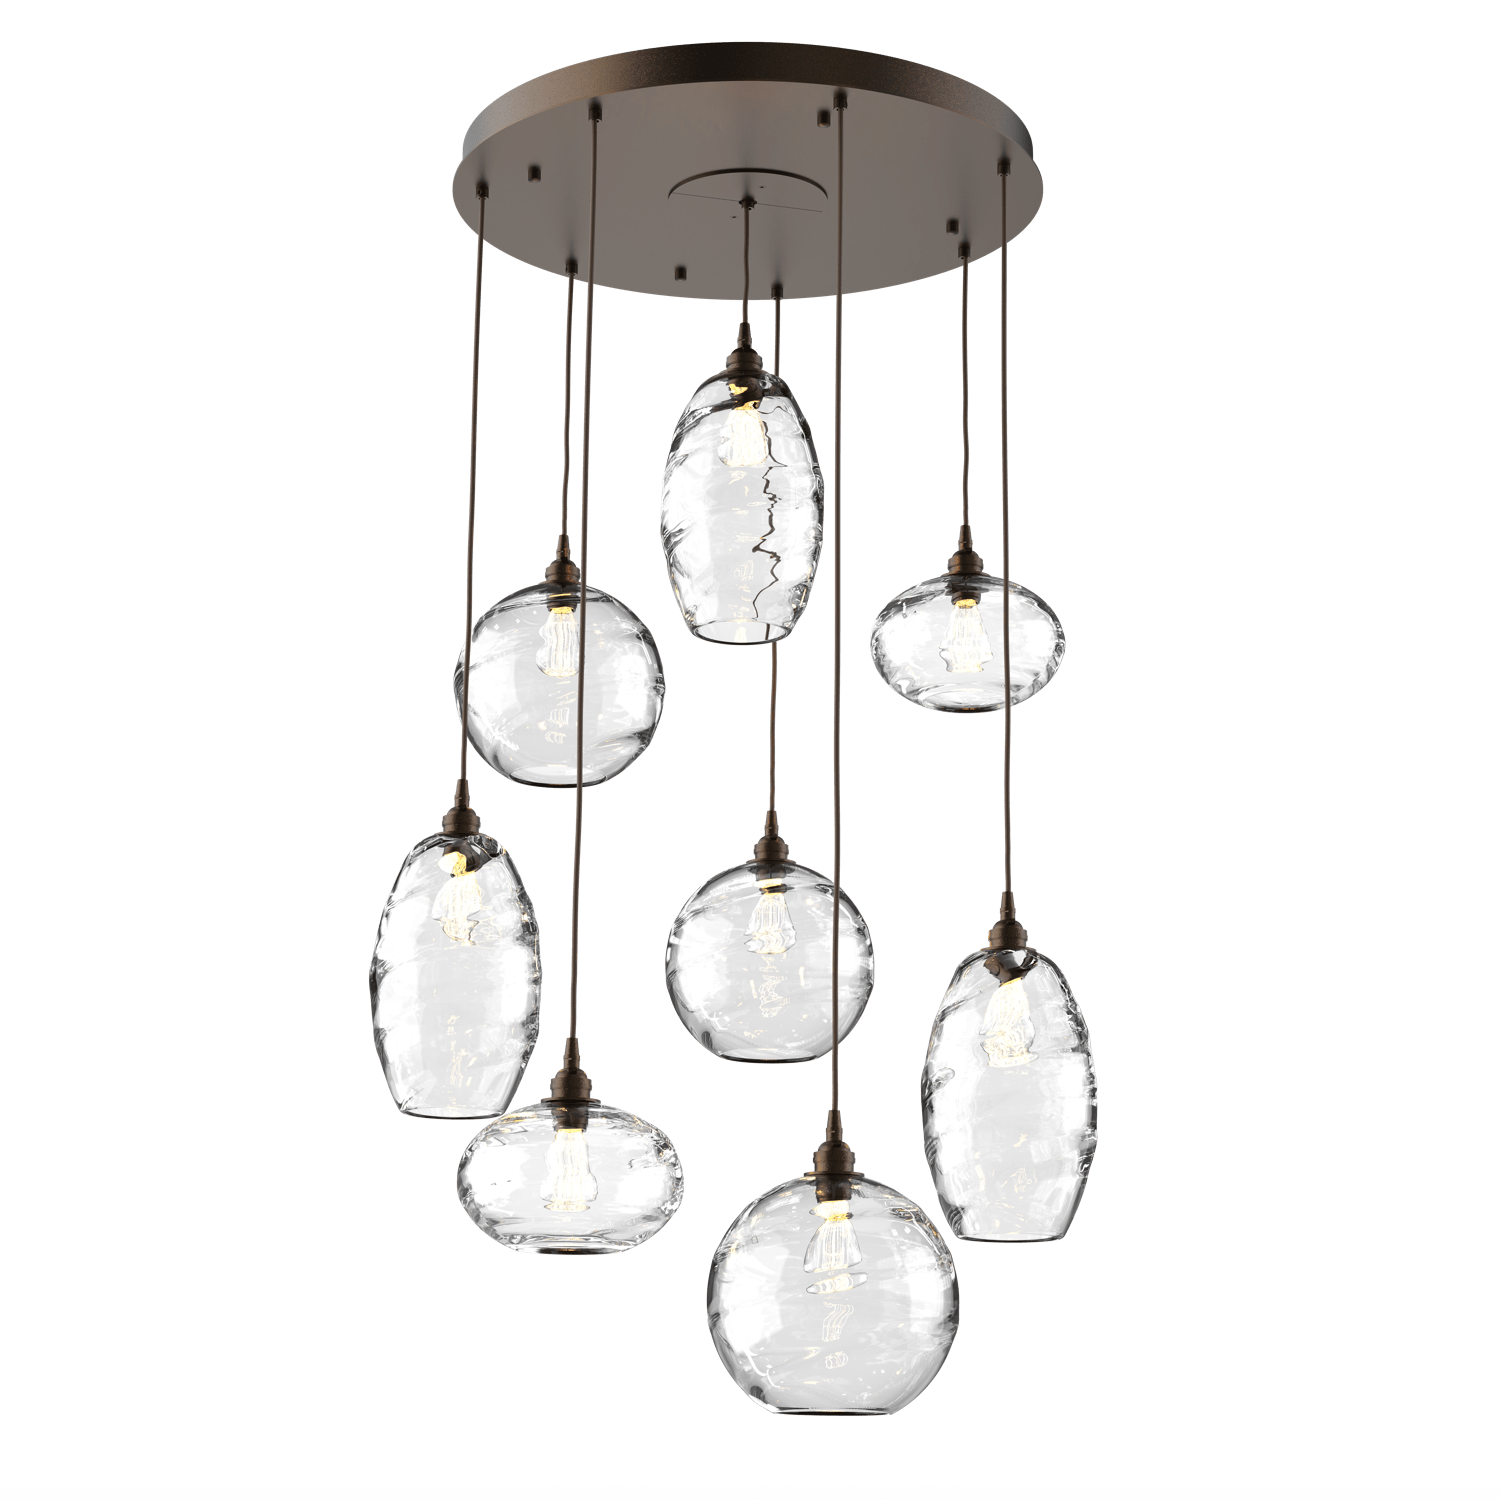 CHB0048-08-FB-OC-Hammerton-Studio-Optic-Blown-Glass-Misto-8-light-round-pendant-chandelier-with-flat-bronze-finish-and-optic-clear-blown-glass-shades-and-incandescent-lamping